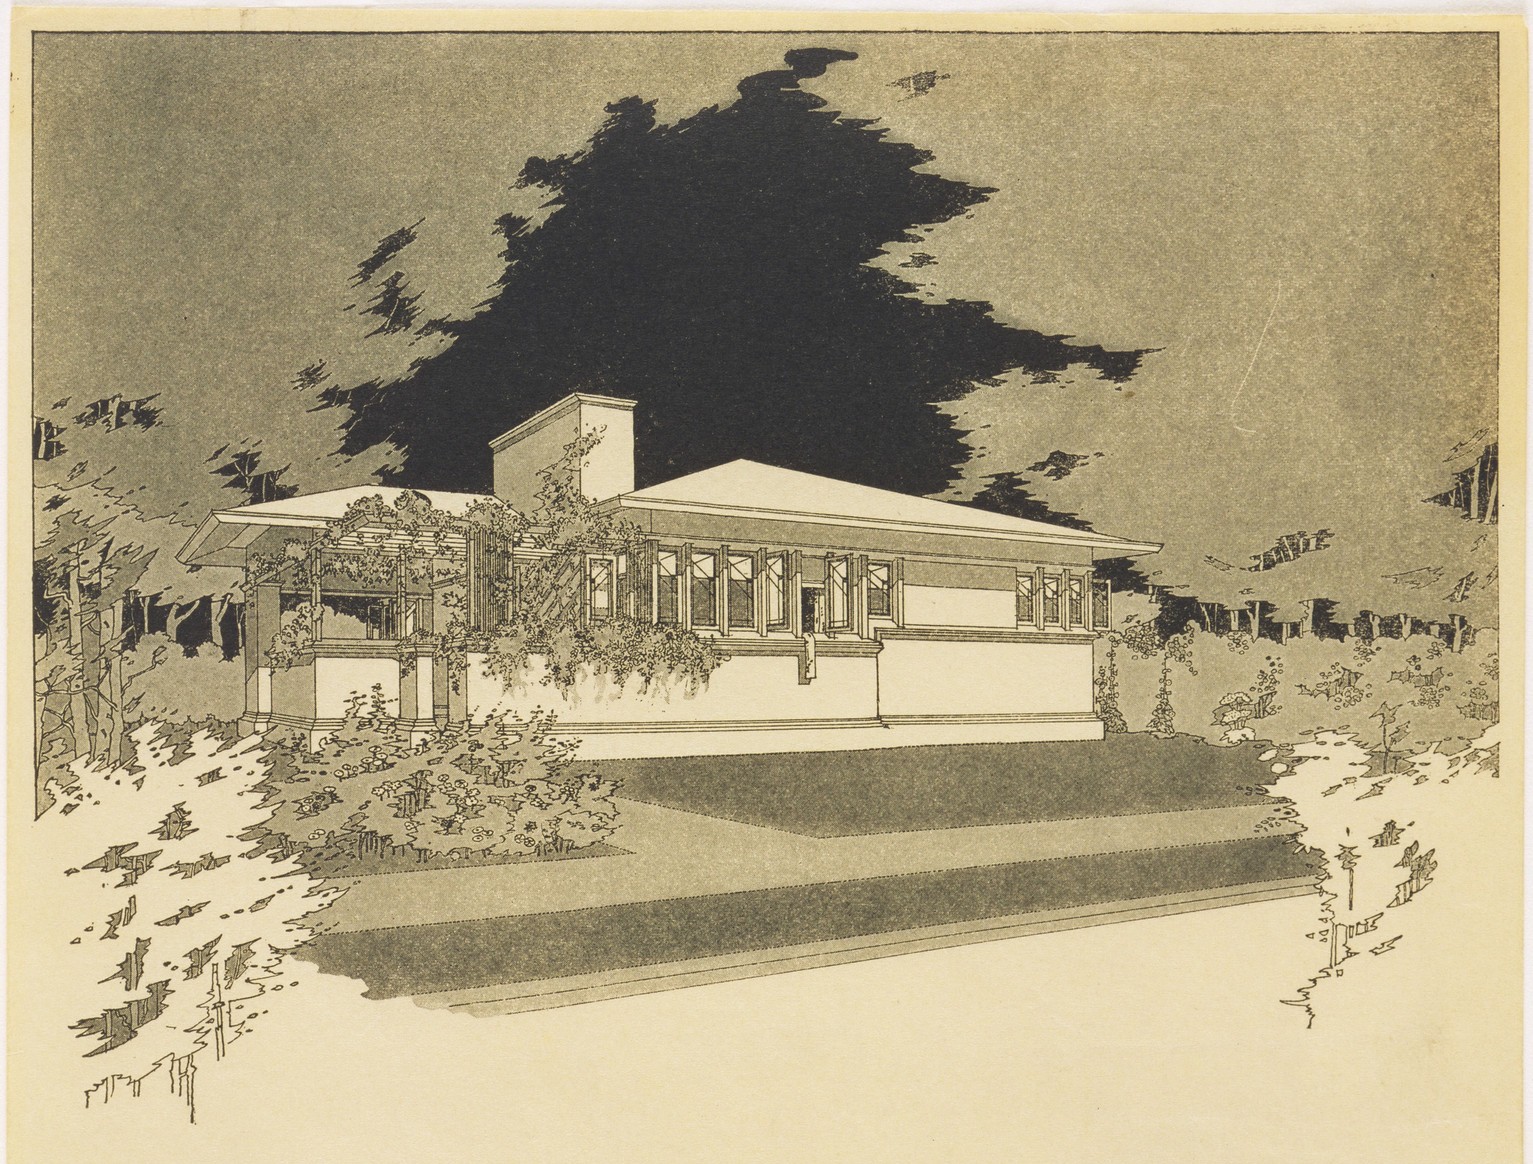 Frank Lloyd Wright comes to MoMA